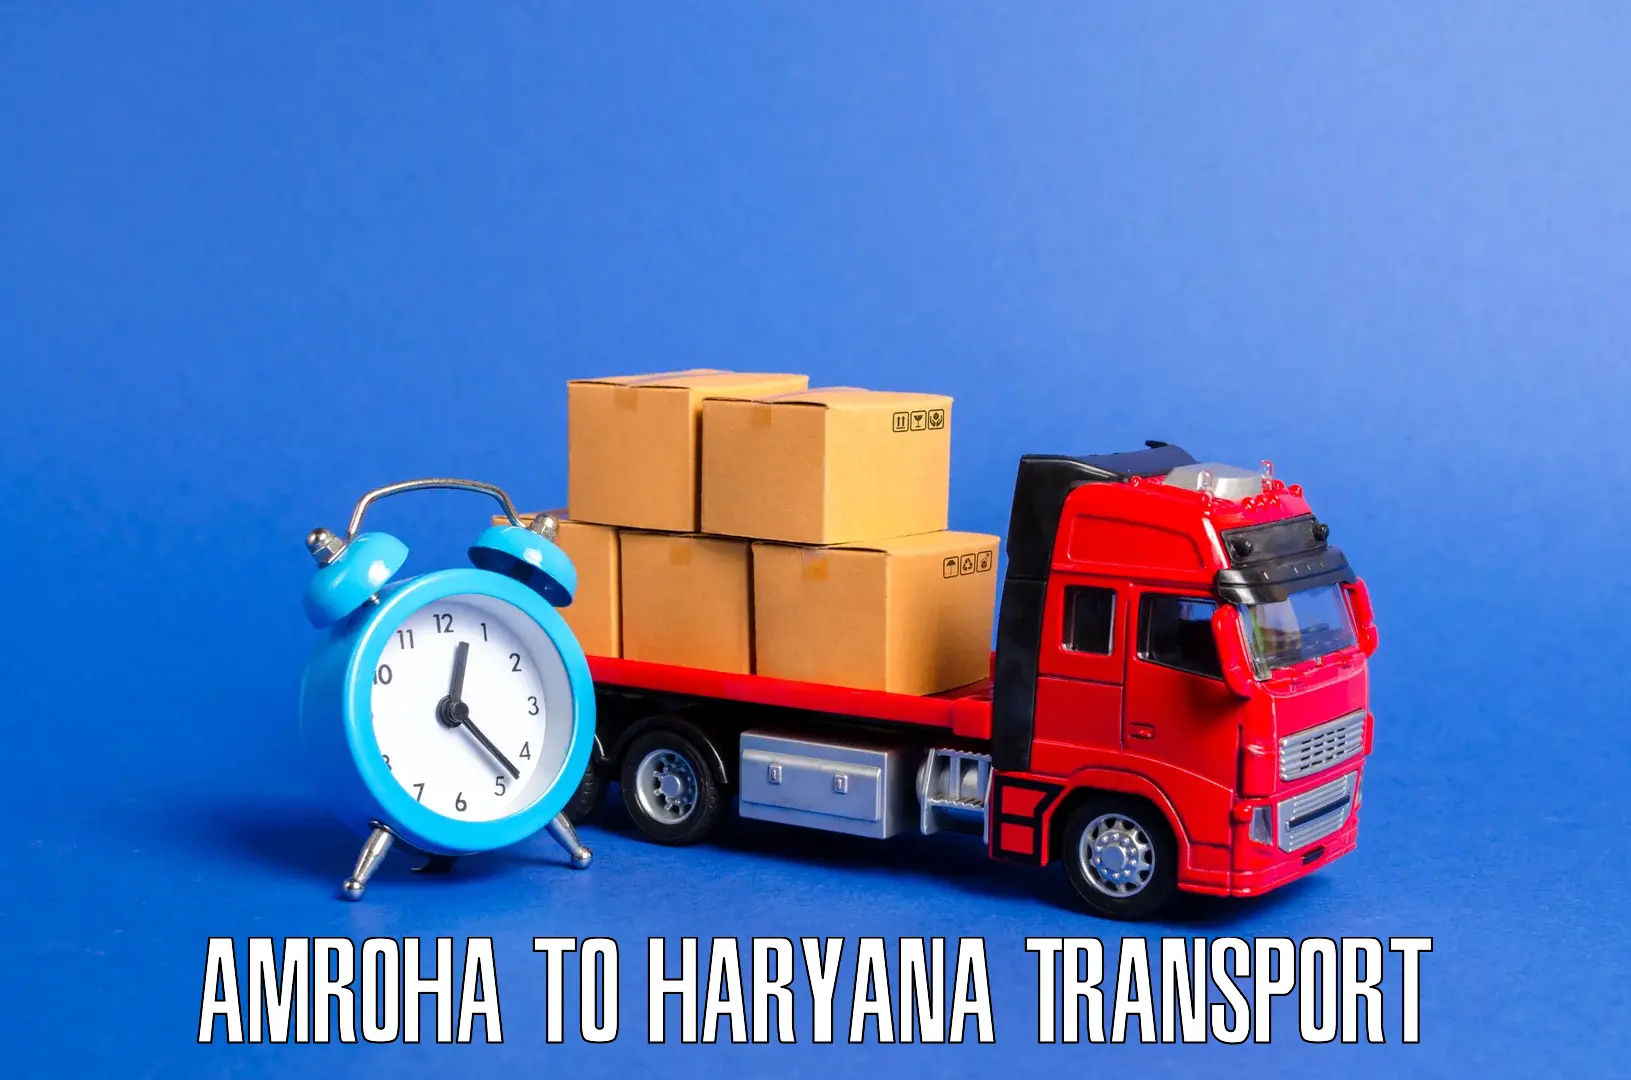 Transport bike from one state to another Amroha to Haryana